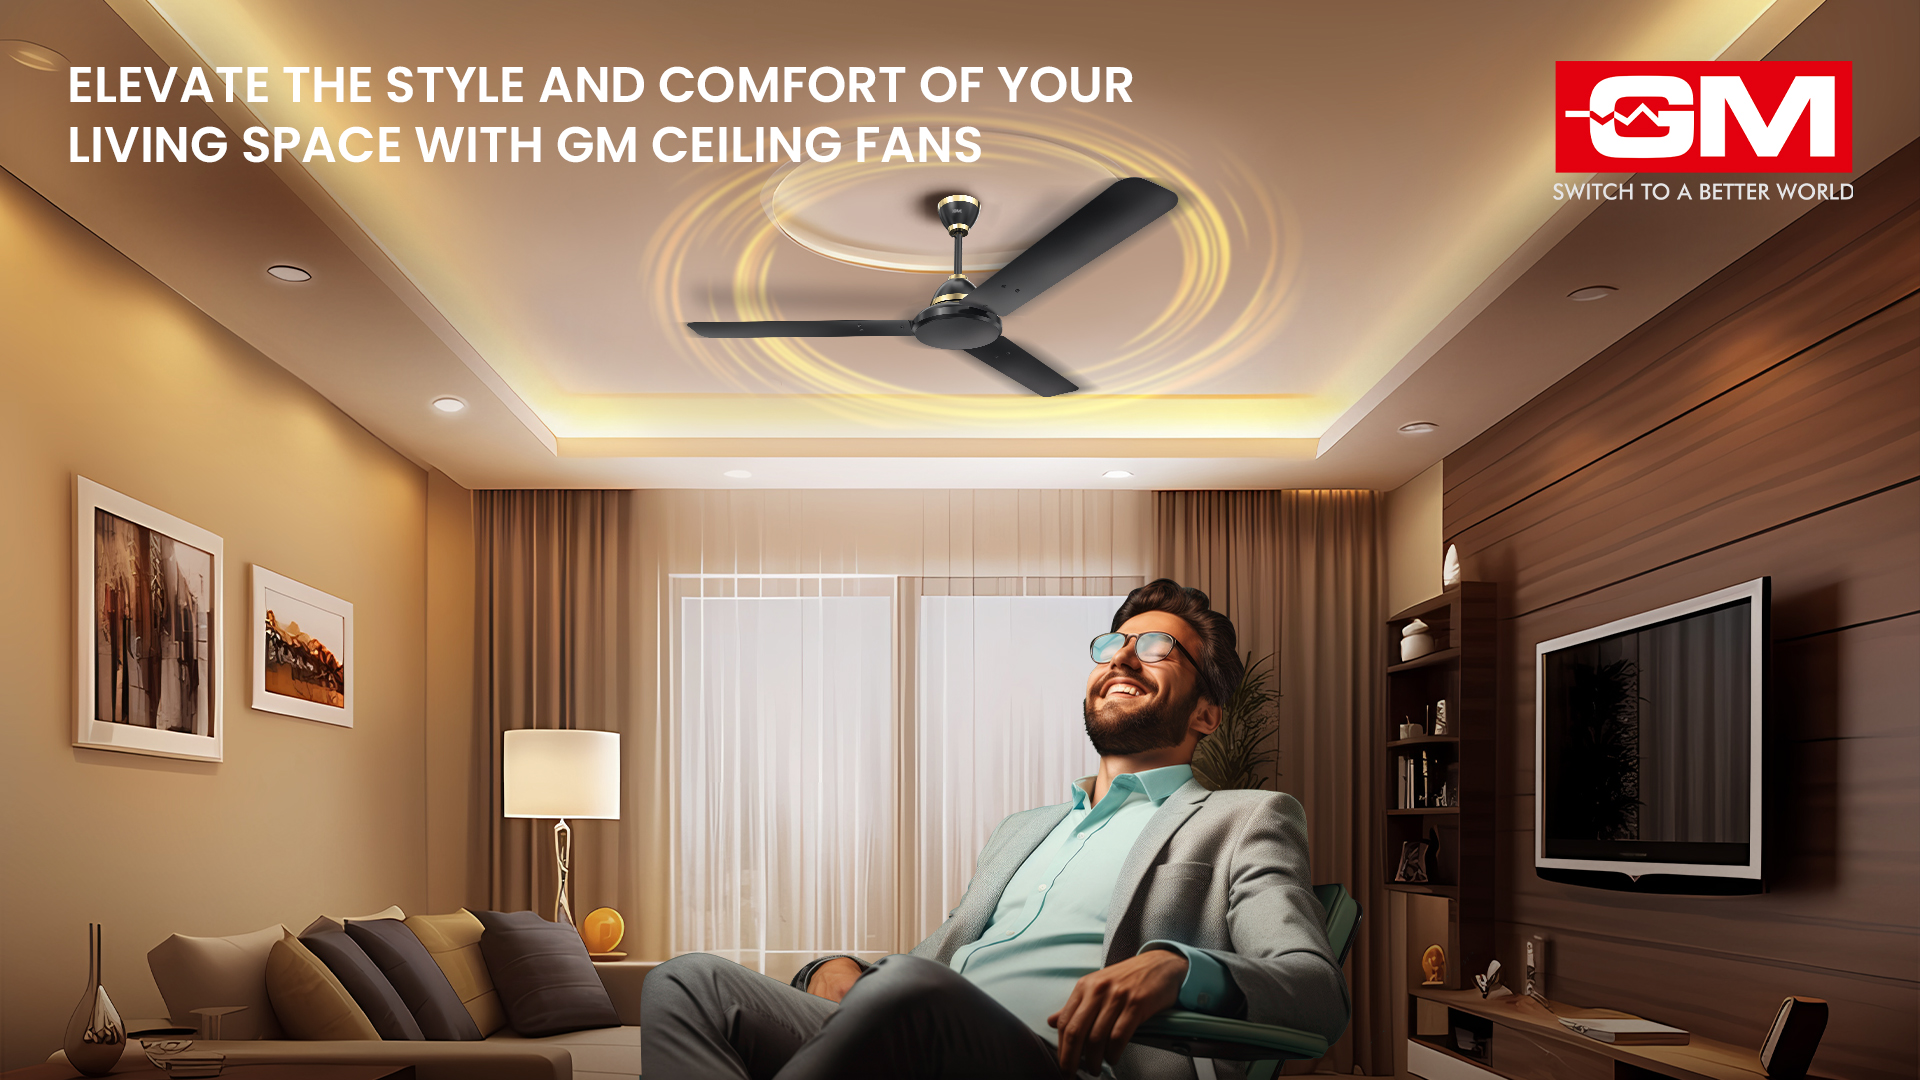 A 6-Point Checklist to Elevating Comfort and Style with Ceiling Fans in Every Room